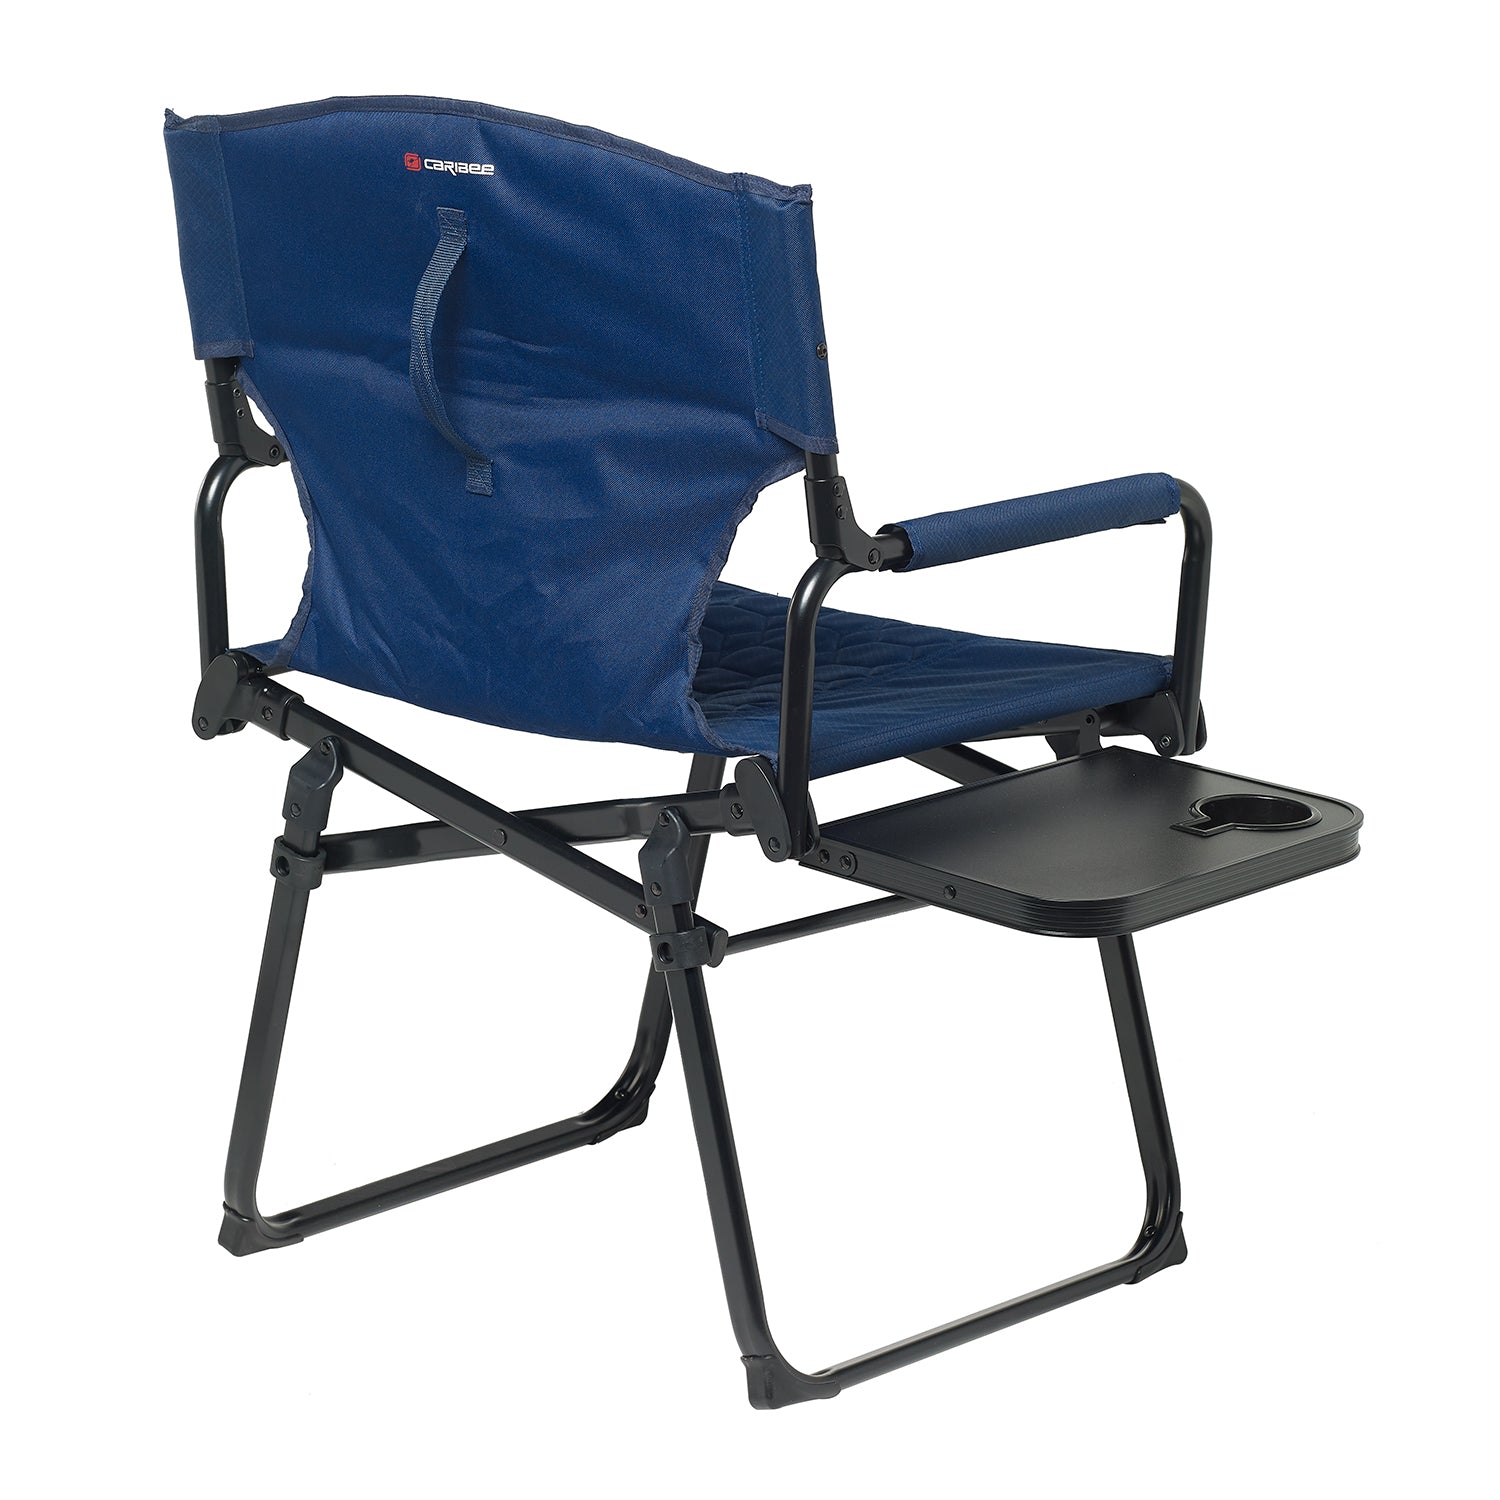 Caribee Directors Chair with table rear view